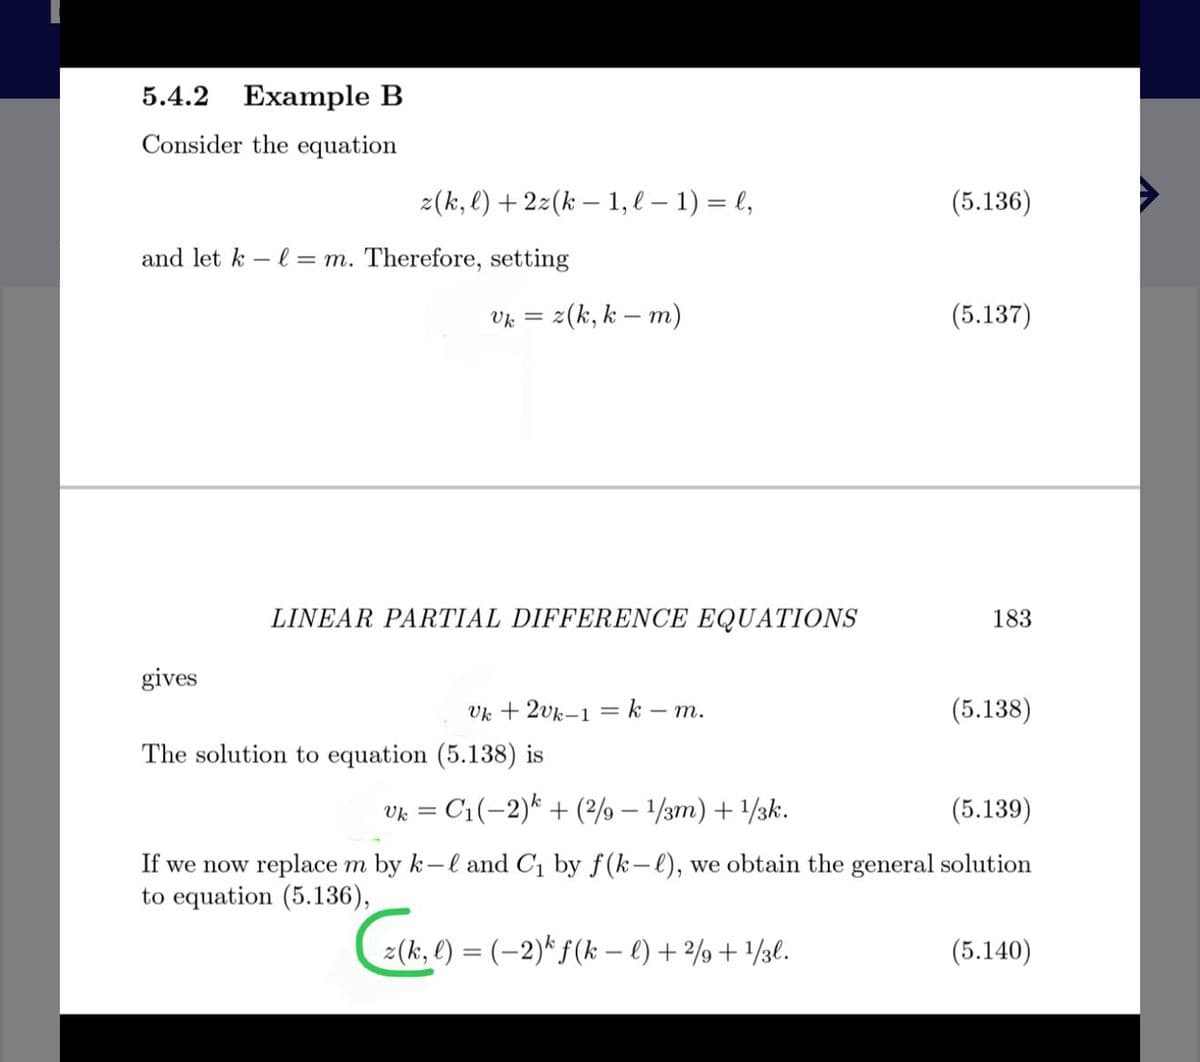 5.4.2 Example B
Consider the equation
2(k, l) + 2z(k – 1, l – 1) = l,
(5.136)
and let k – l = m. Therefore, setting
= z(k, k – m)
(5.137)
LINEAR PARTIAL DIFFERENCE EQUATIONS
183
gives
Vk + 2vk-1 = k – m.
(5.138)
The solution to equation (5.138) is
Vk = C1(-2)* + (? – 1/3m) + /3k.
(5.139)
If we now replace m by k-l and C1 by f(k-l), we obtain the general solution
to equation (5.136),
:(k, €) = (-2)* f(k – €) + 2%+ /3l.
(5.140)
